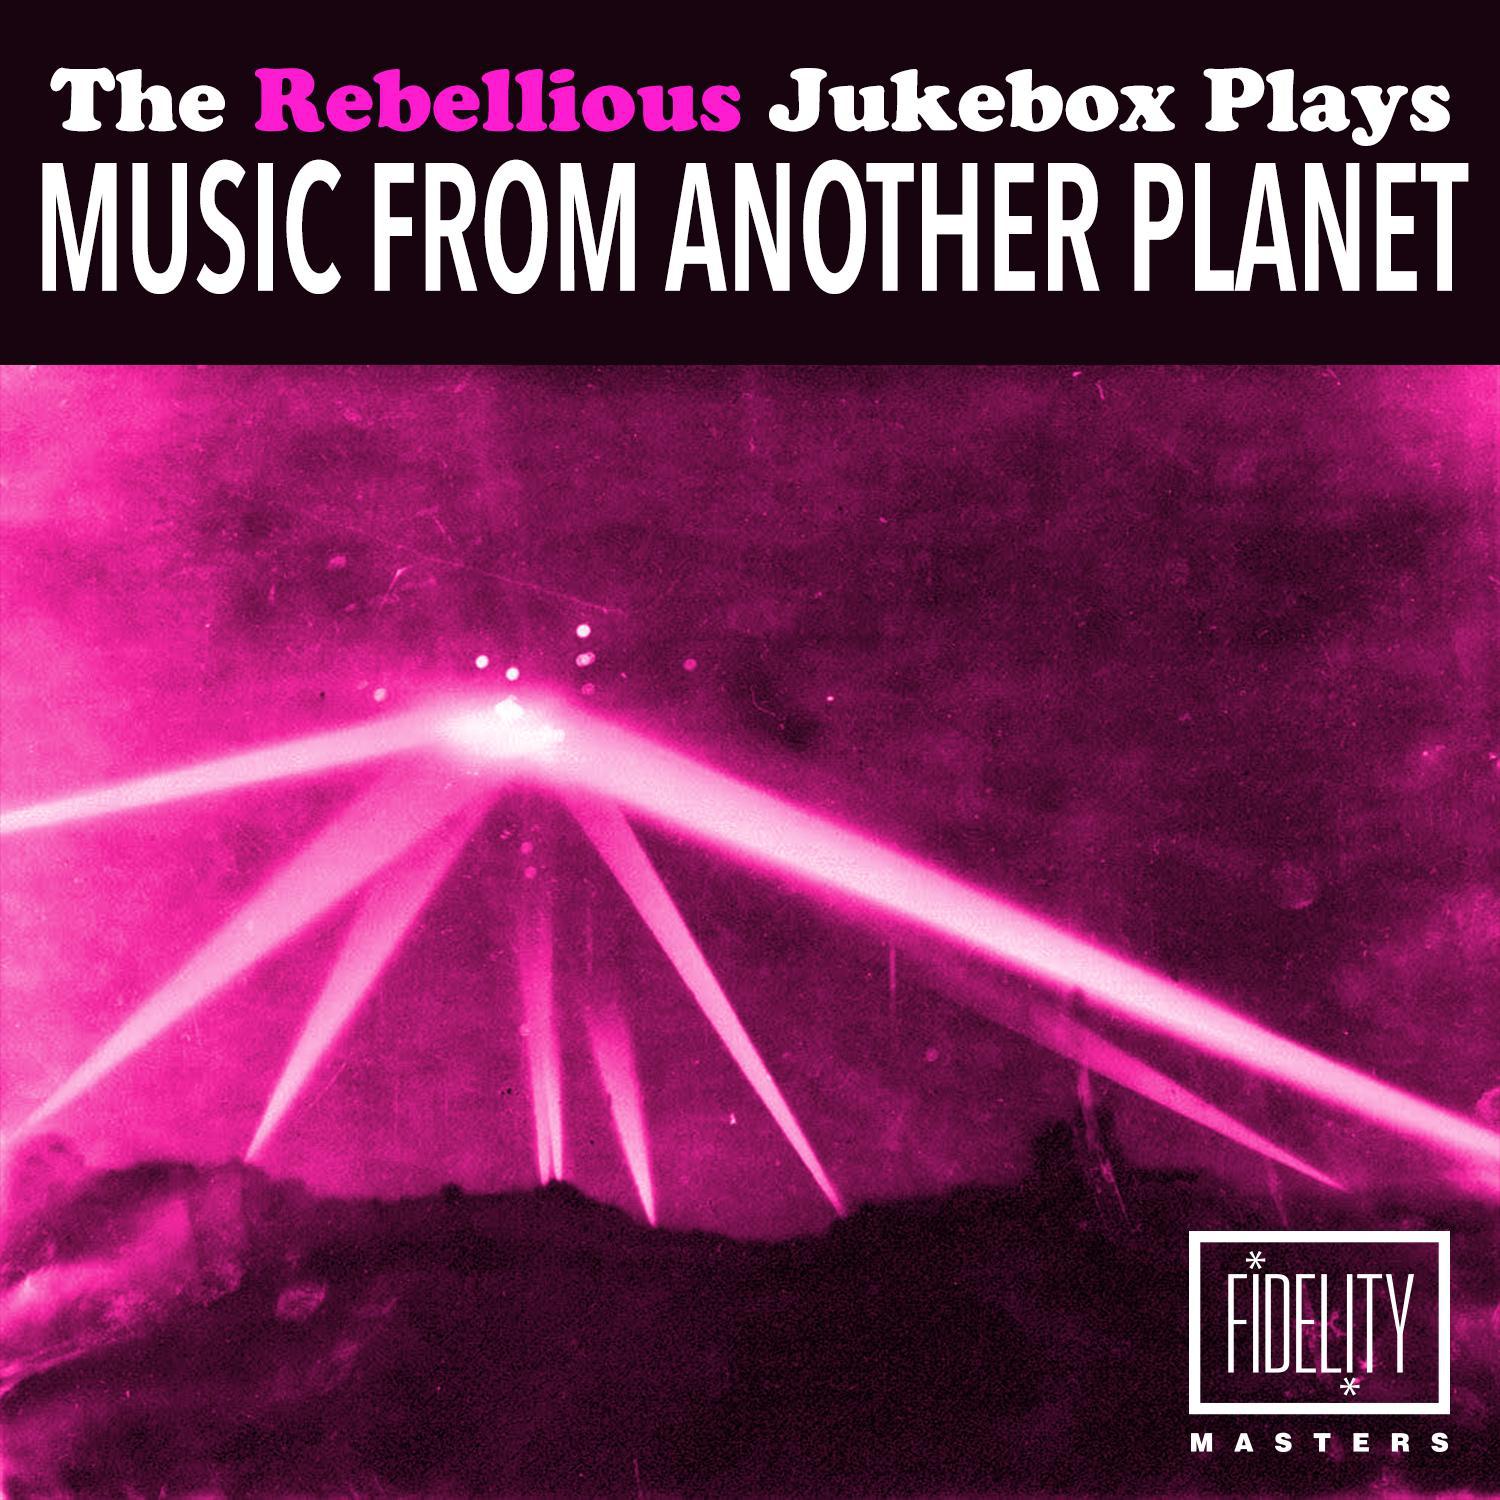 The Rebellious Jukebox Plays Music from Another Planet